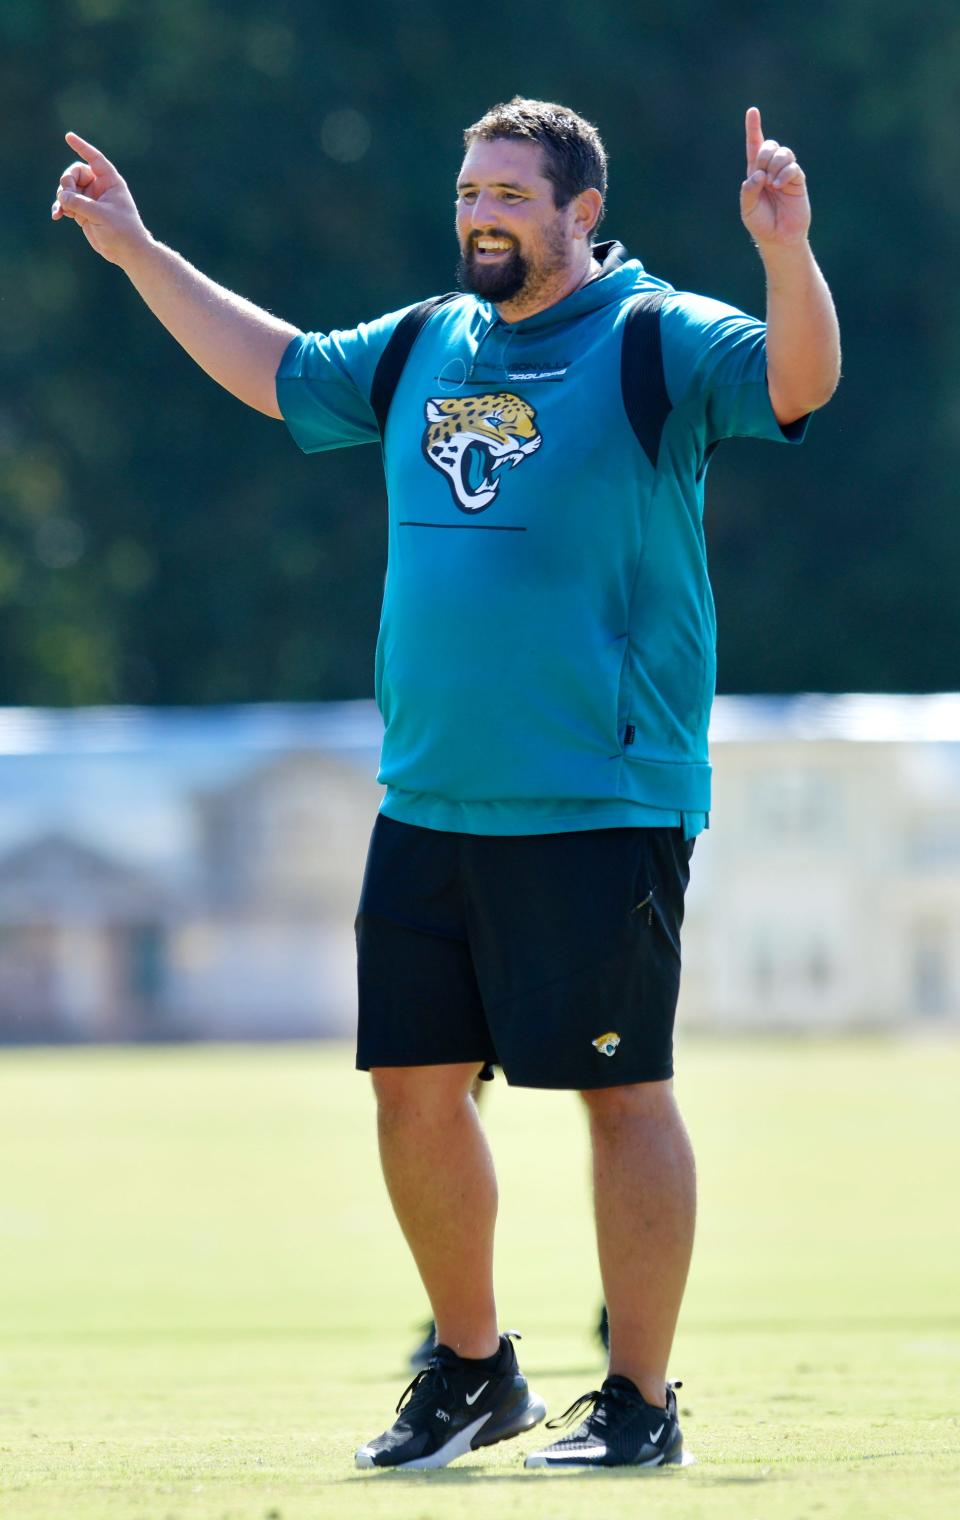 Jaguars Offensive line coach Phil Rauscher during one-on-one drills at Monday's training camp. The Jacksonville Jaguars held training camp Monday, August 1, 2022, at the Episcopal School of Jacksonville Knight Campus practice fields on Atlantic Blvd.